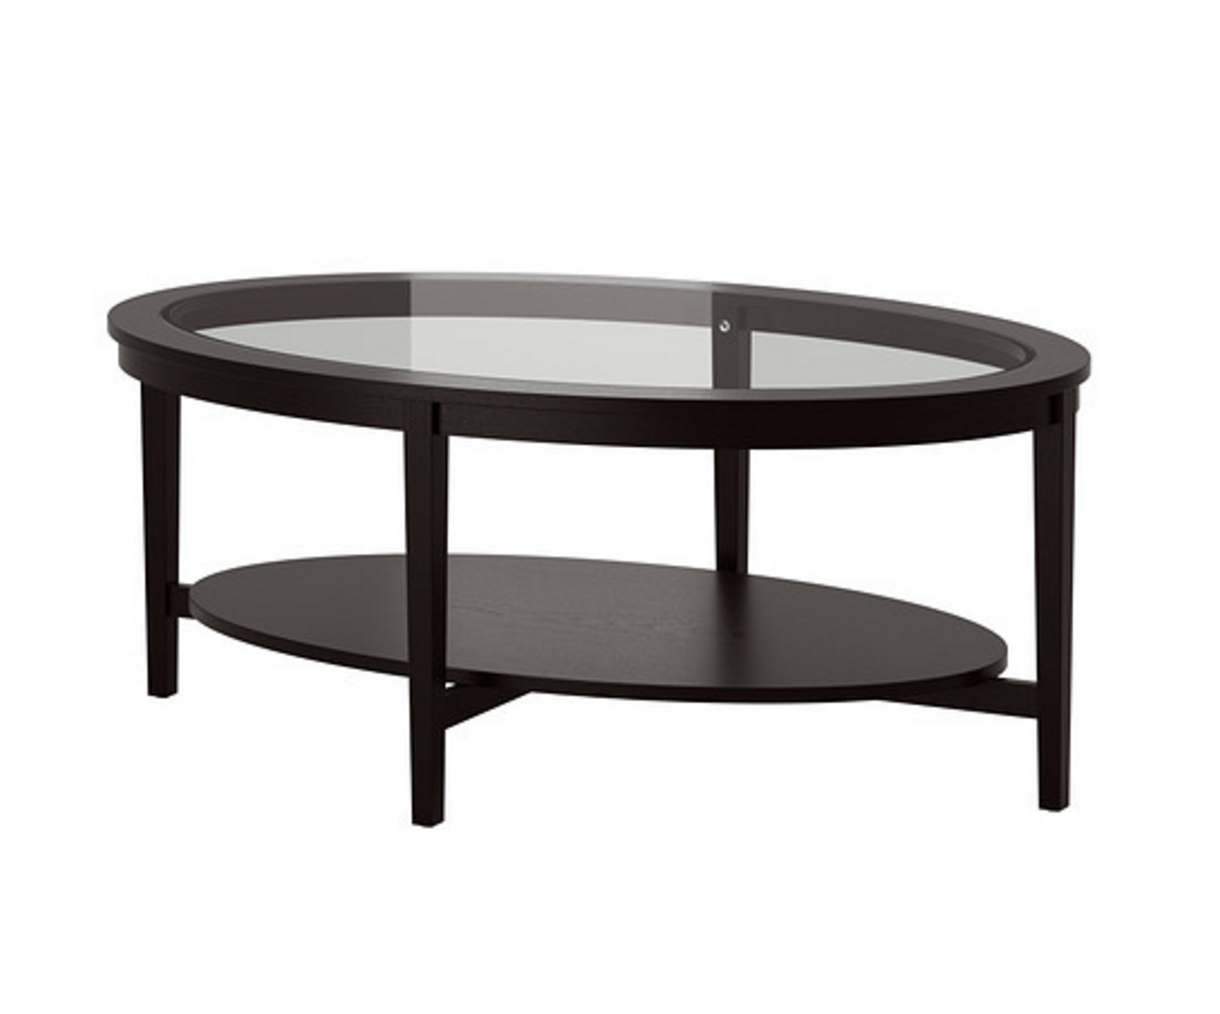 14 Super Chic Coffee Tables Under $200 That Will Work In Any Living Room
